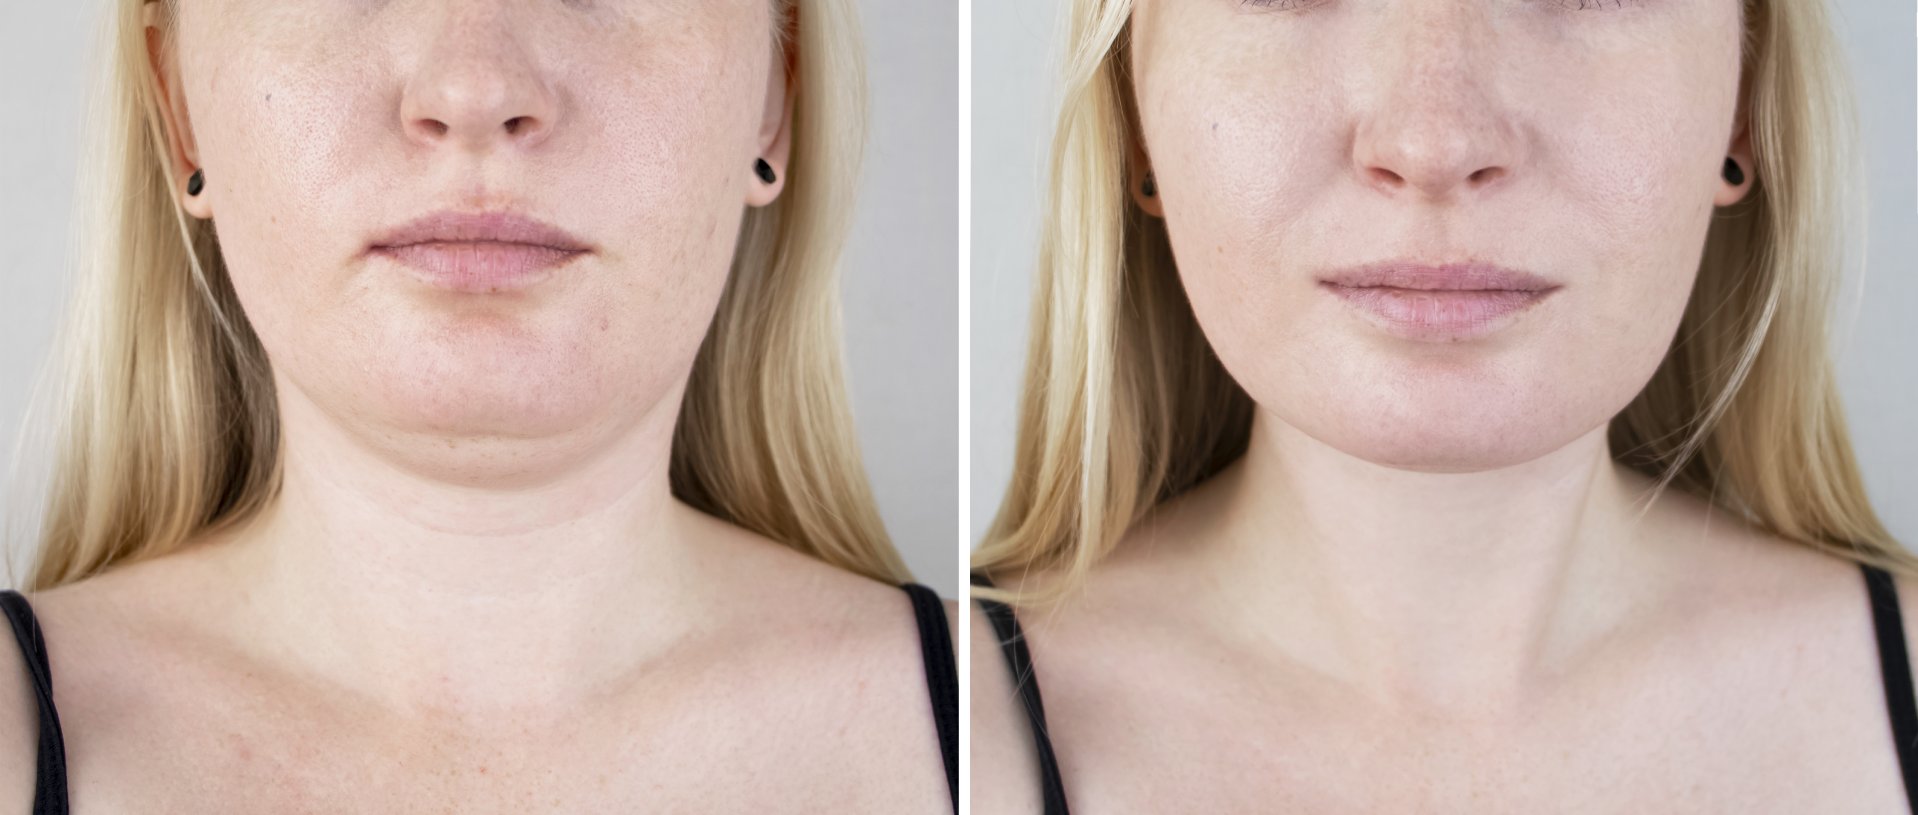 photos before and after chin fat removal and face contour correction